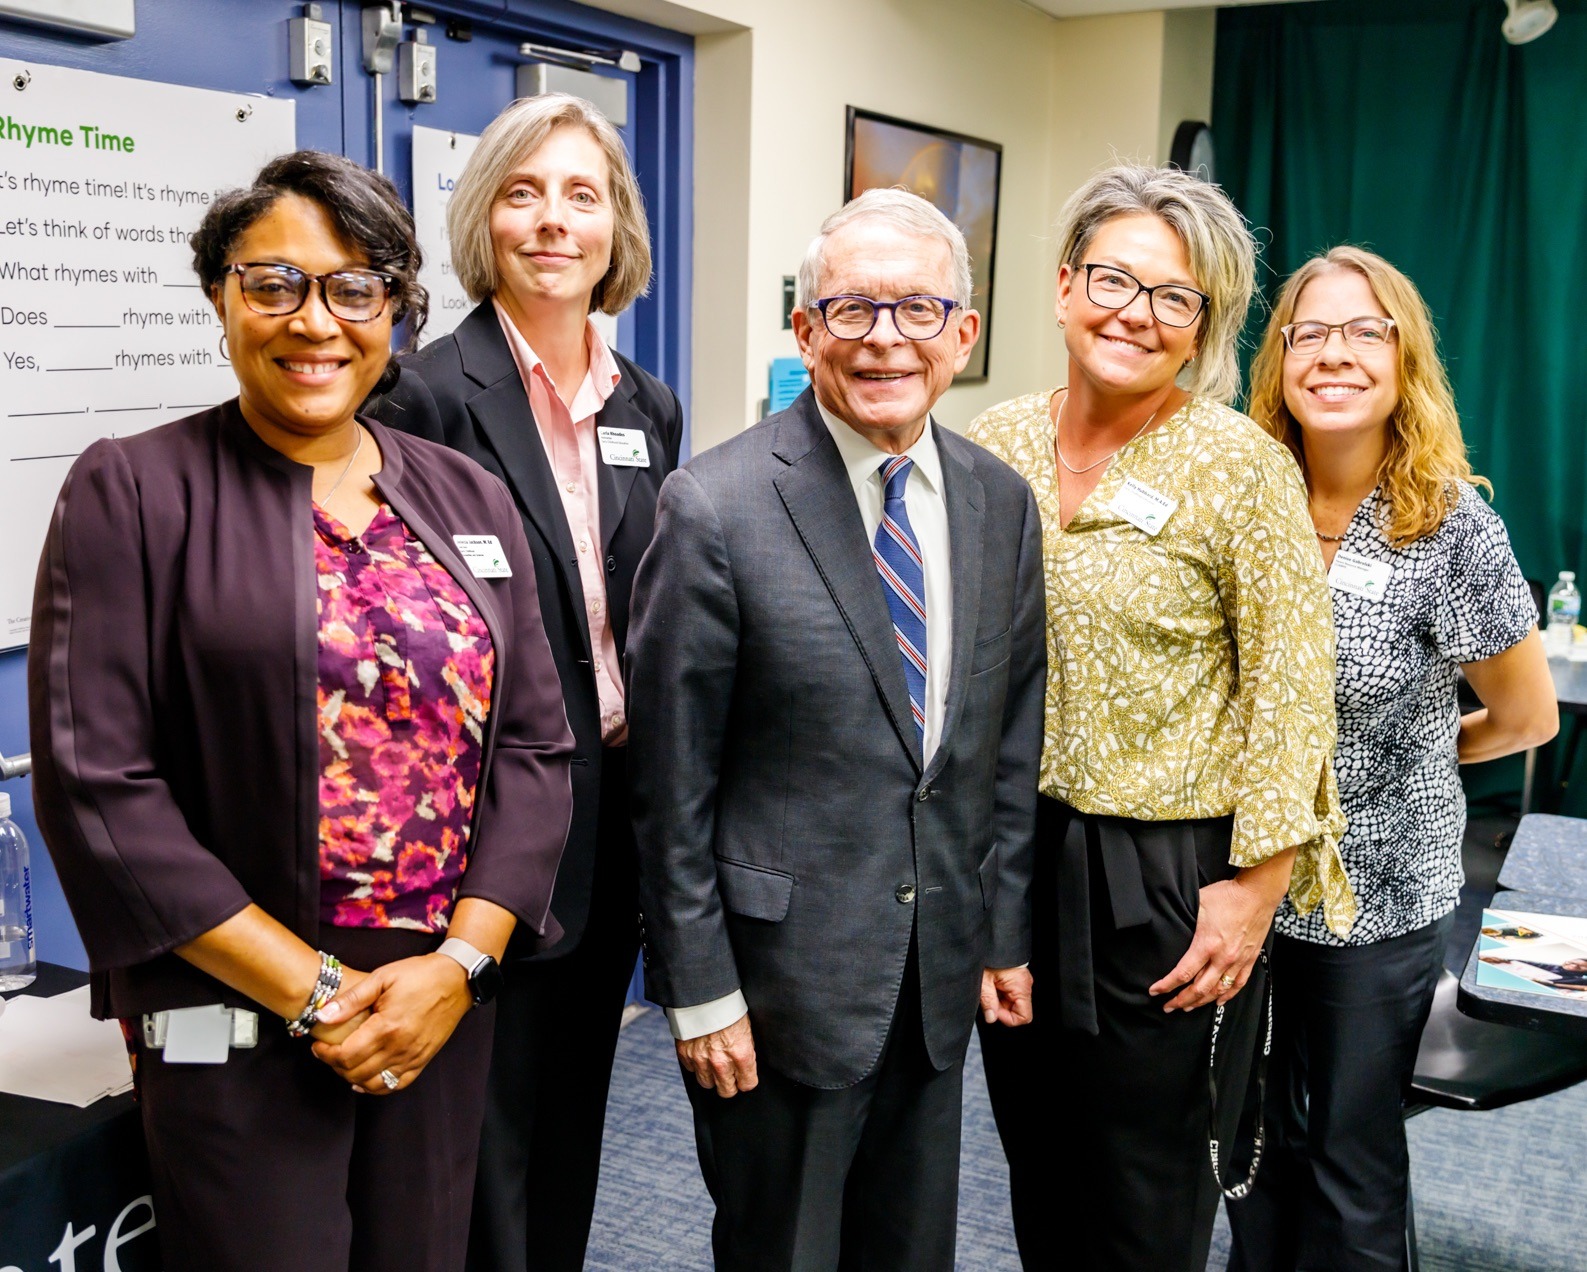 Ohio Gov. Mike DeWine with Cincinnati State ECE faculty members Jelecia Jackson, Carla Rhoades, and Kelly Hubbard and Parent Resource Center manager Denise Gabrelski